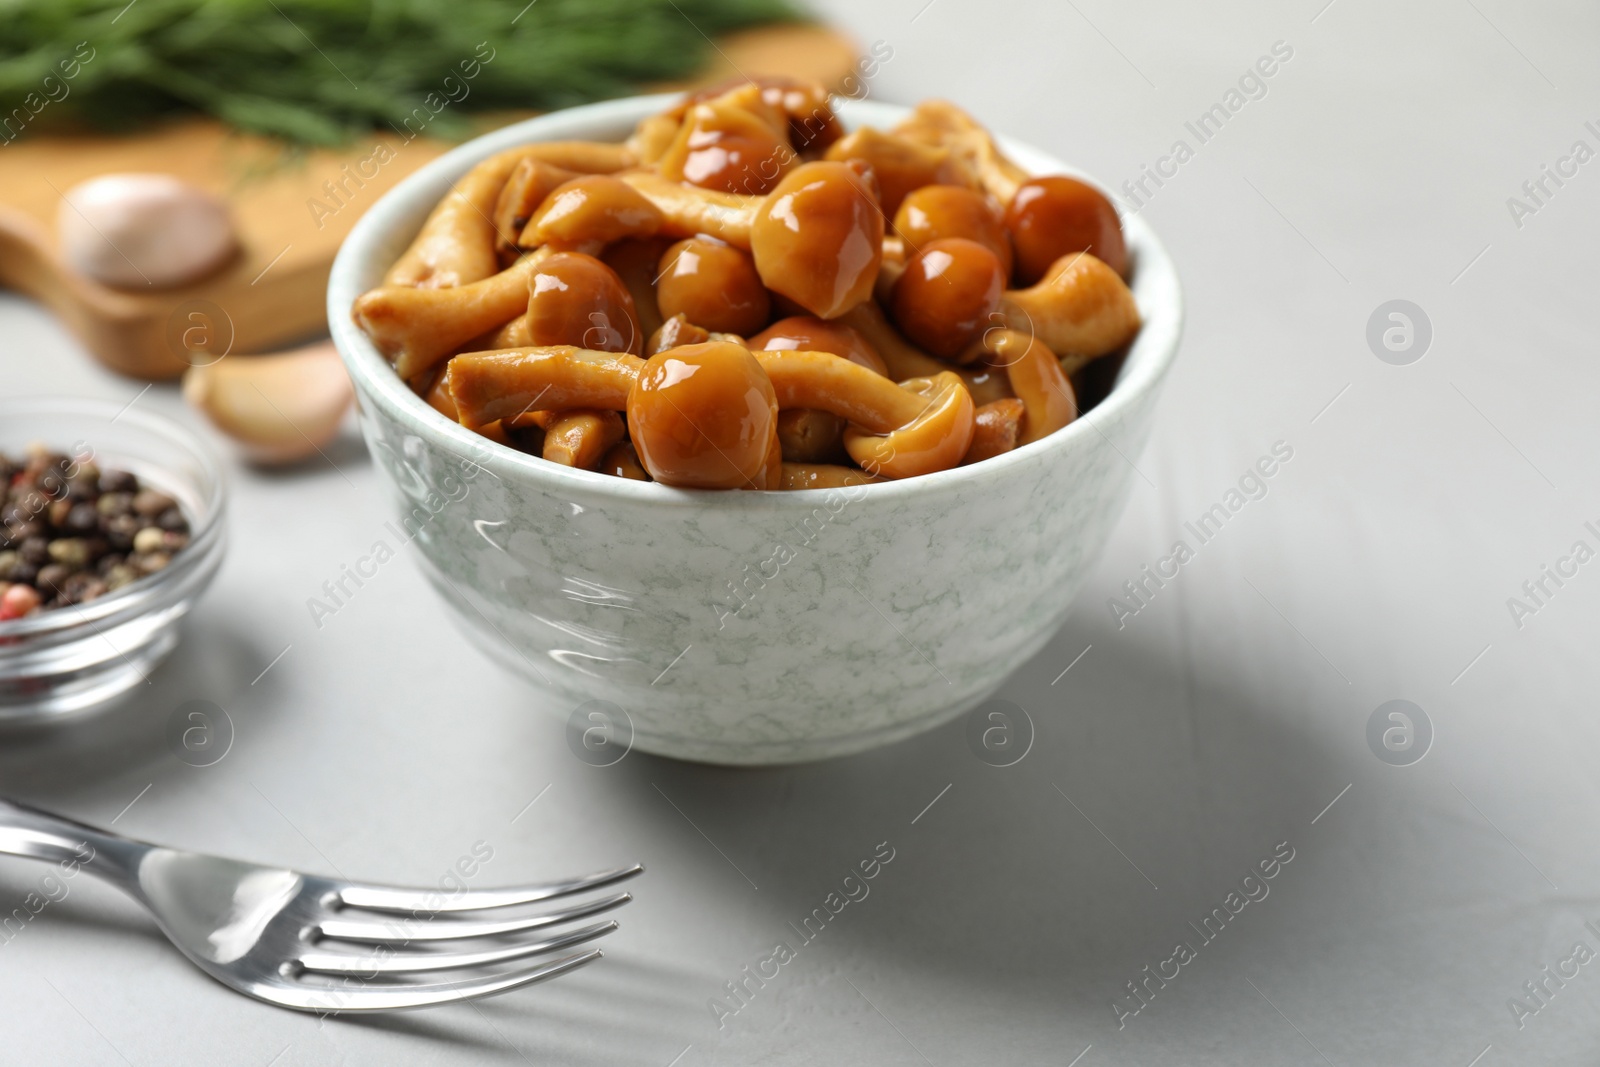 Photo of Tasty marinated mushrooms in bowl on grey table, closeup